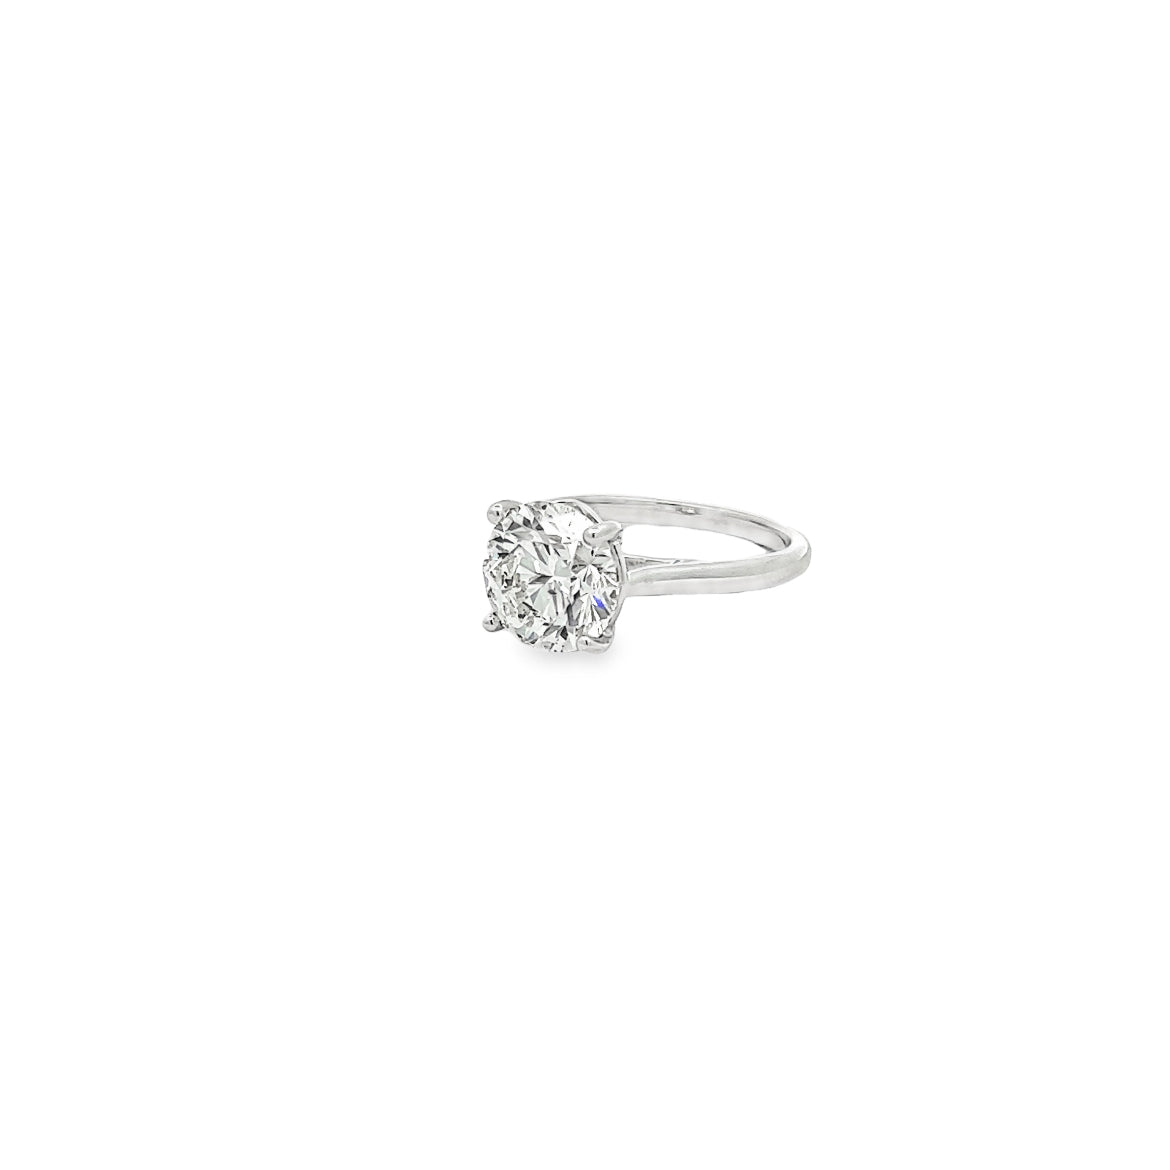 The Davenport 18K White Gold Round Solitaire Engagement Ring